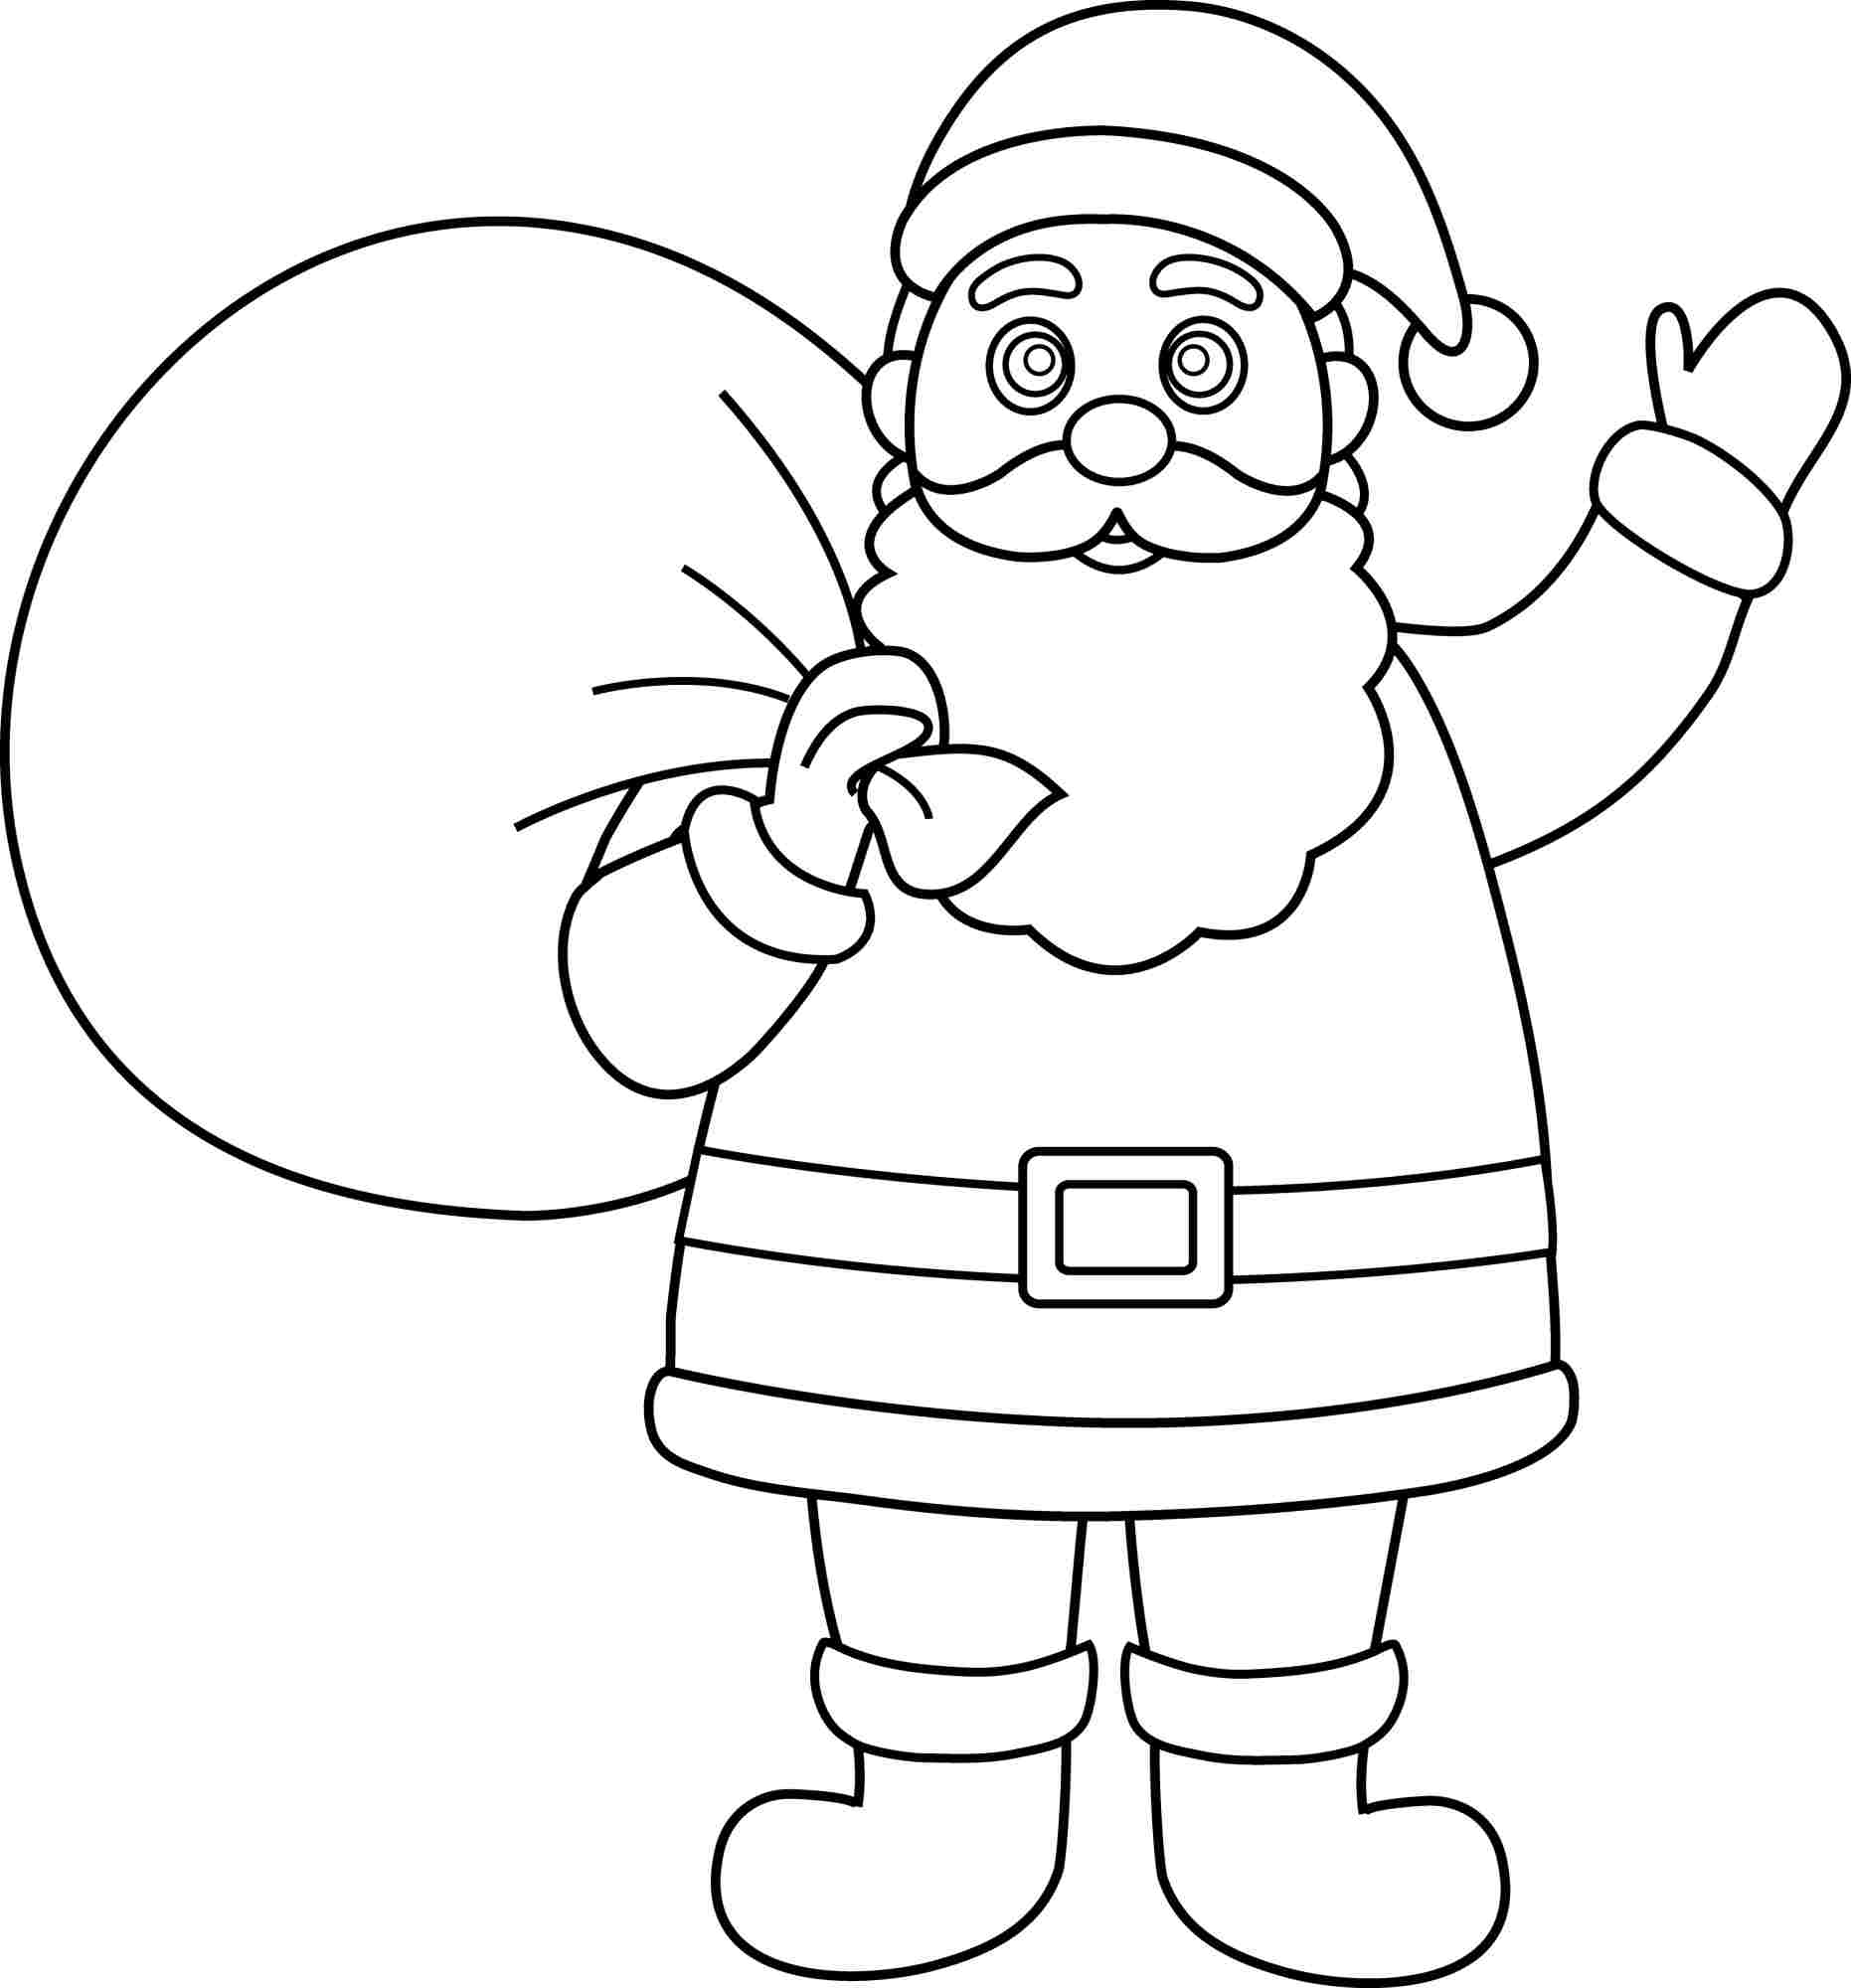 Santa Claus Face With No Beard Coloring Page Coloring Home